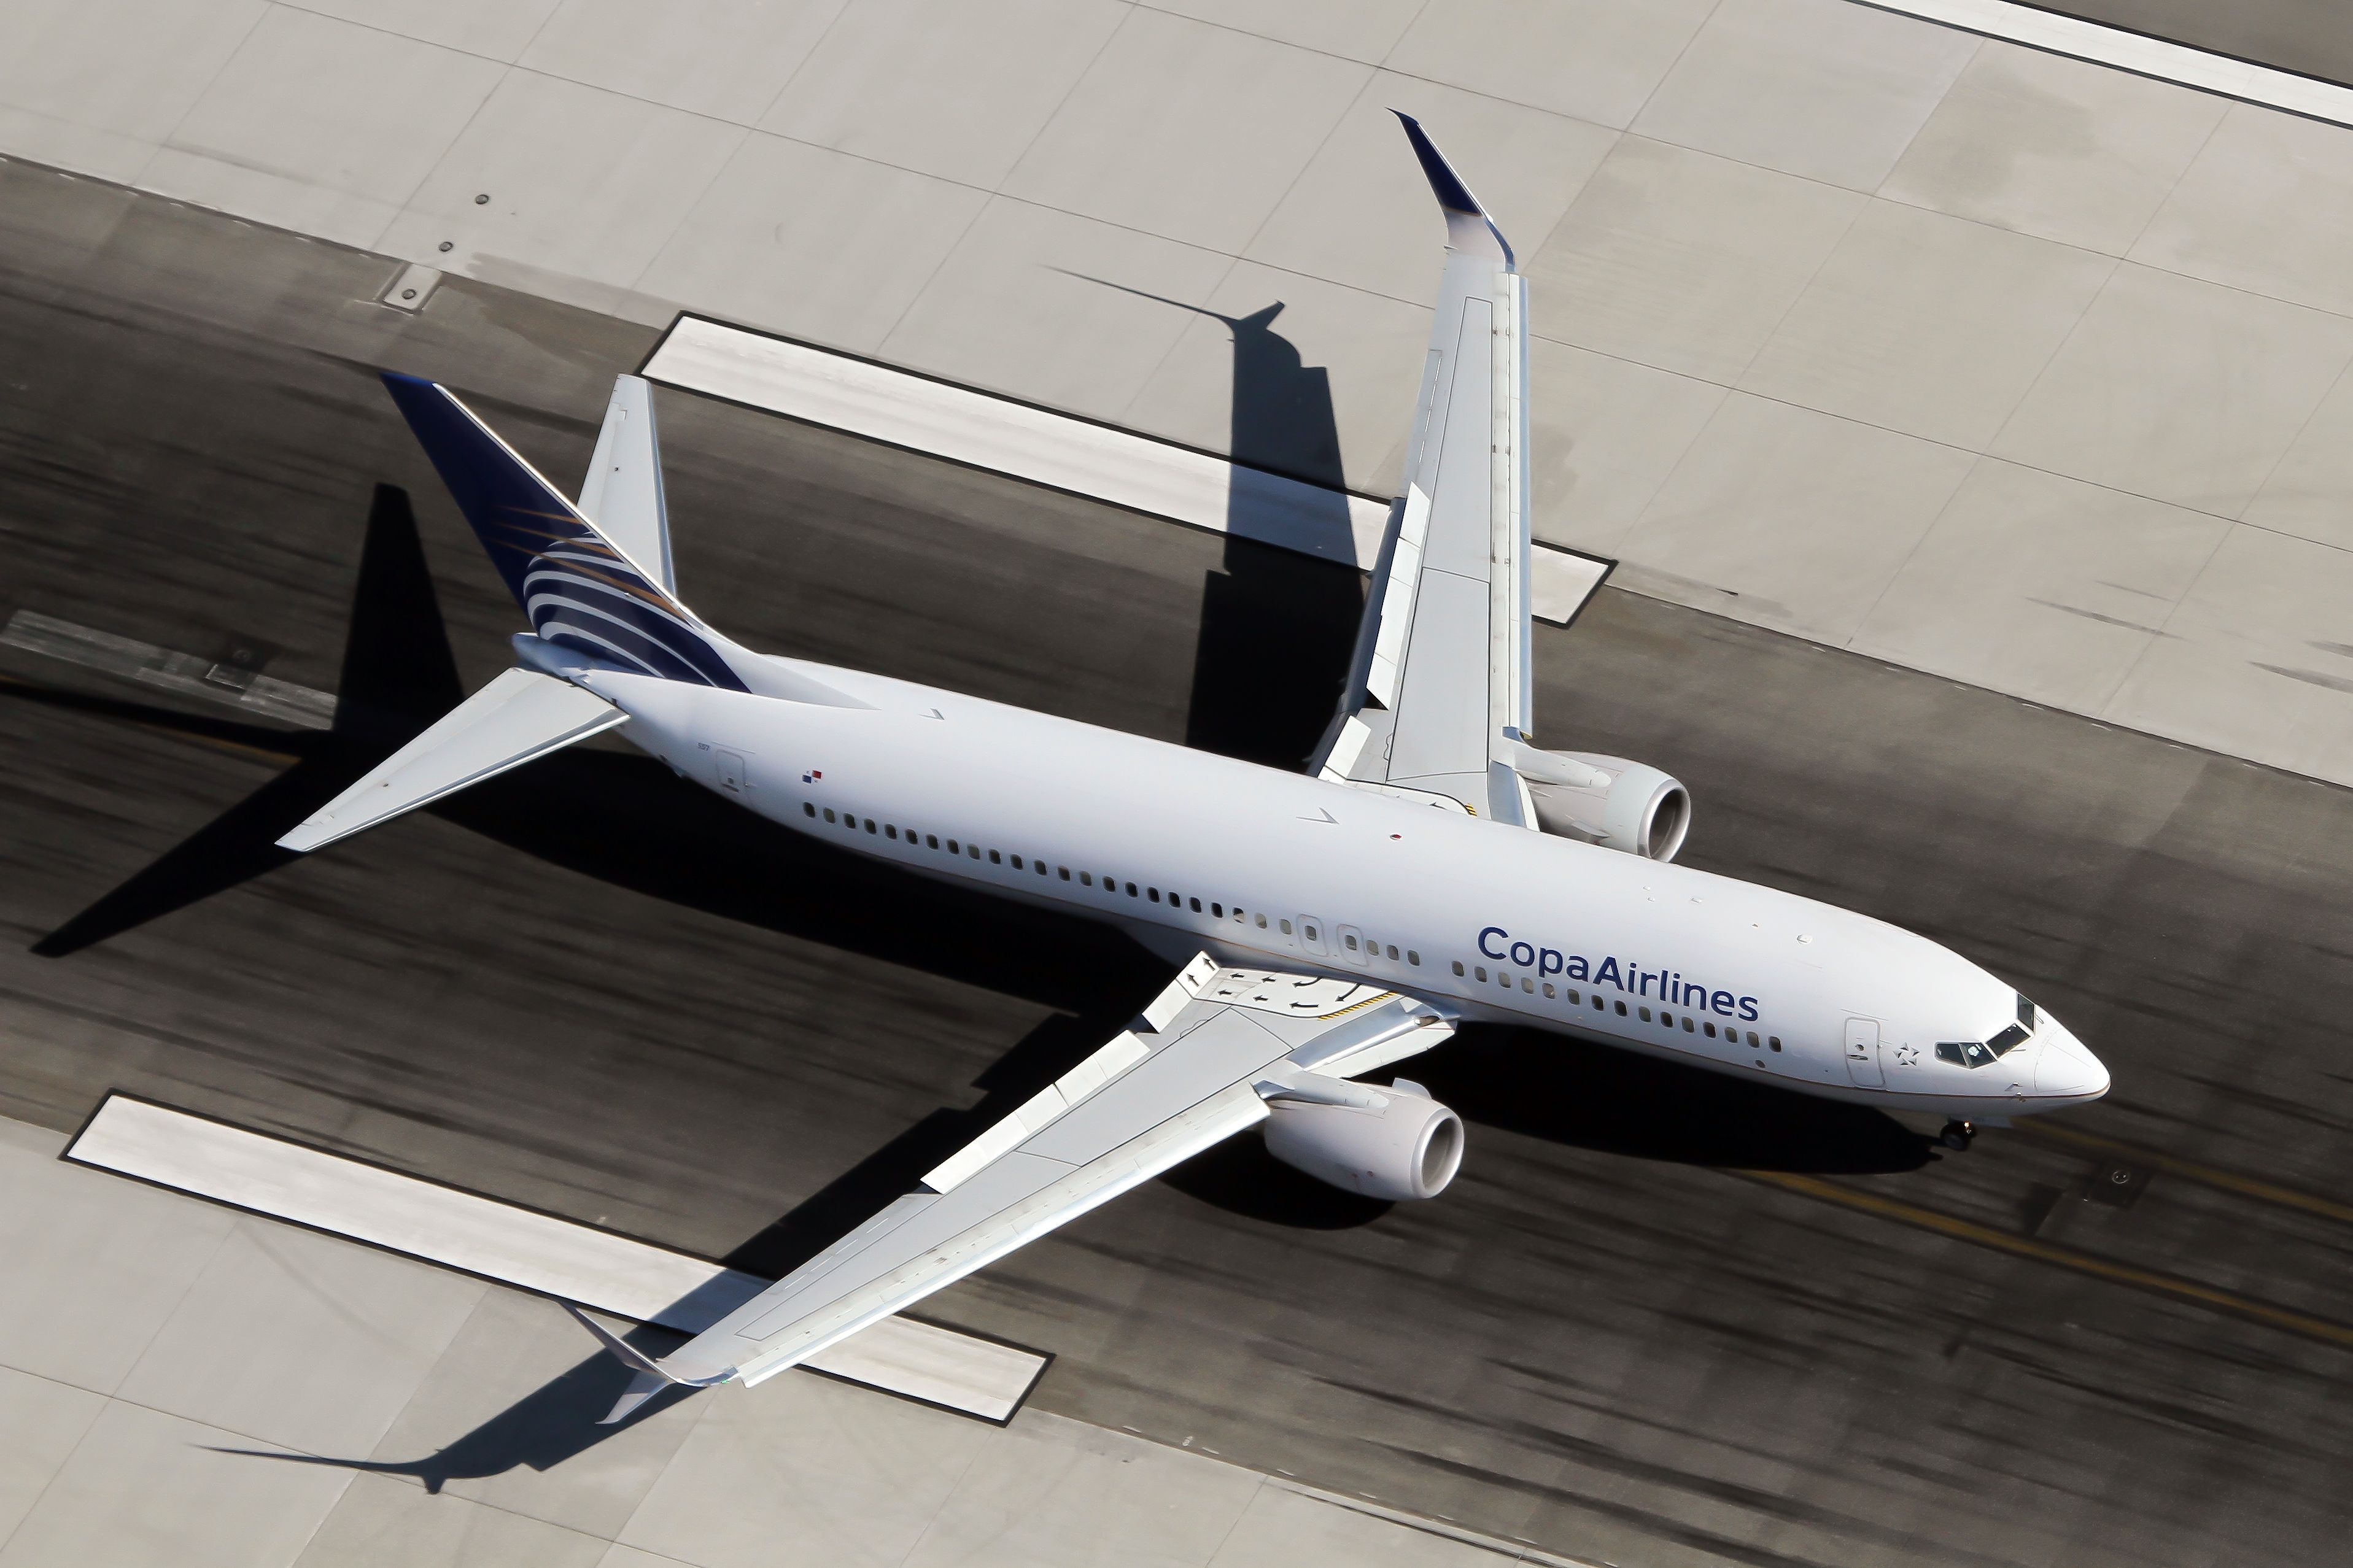 A Copa Airlines aircraft look from above.